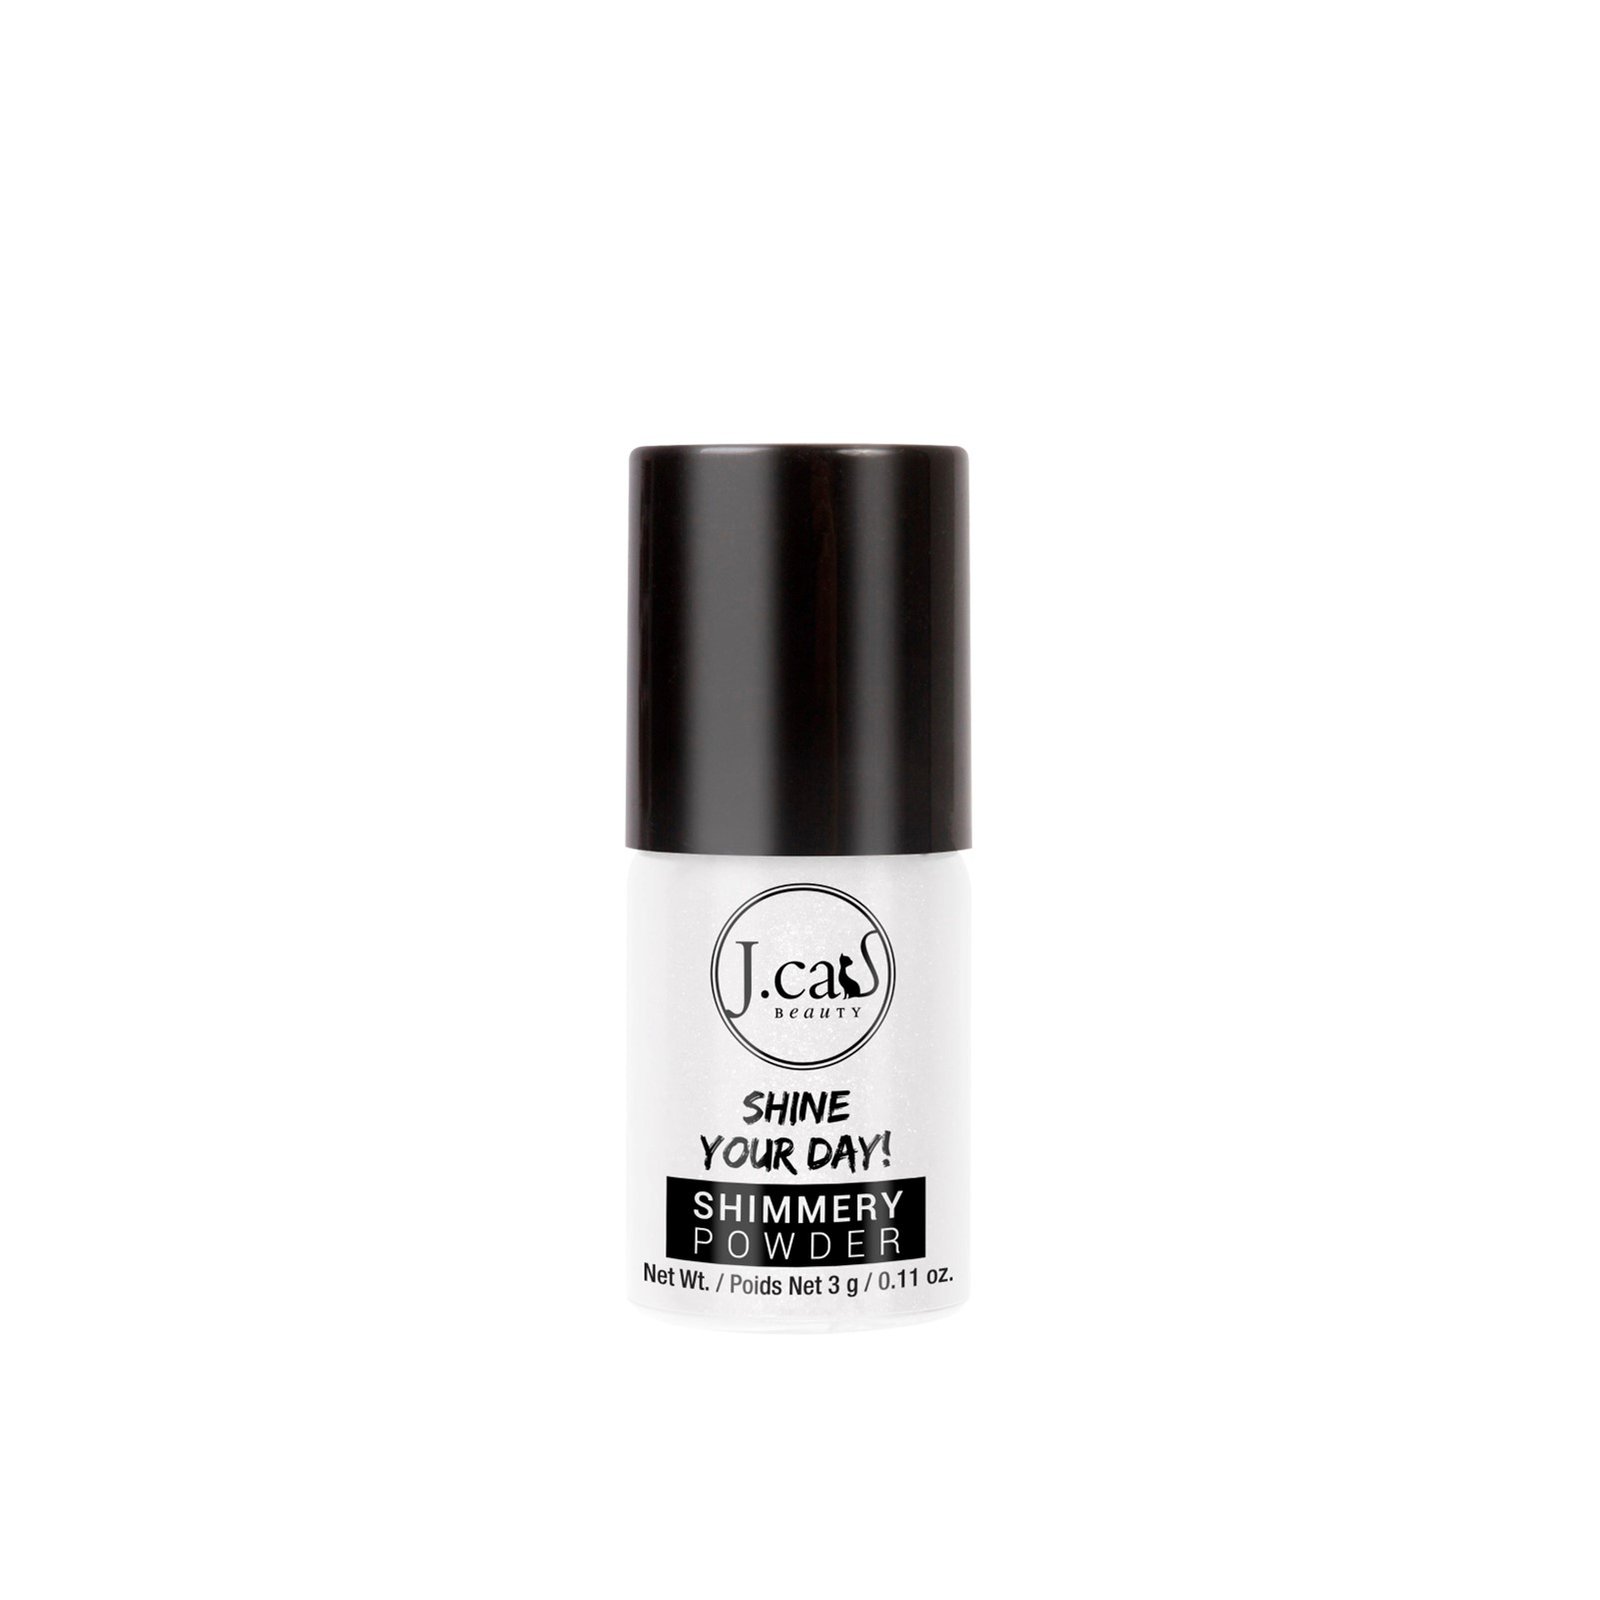 J.Cat Shine Your Day! Shimmery Powder 101 Floral White 3g (0.11 oz)